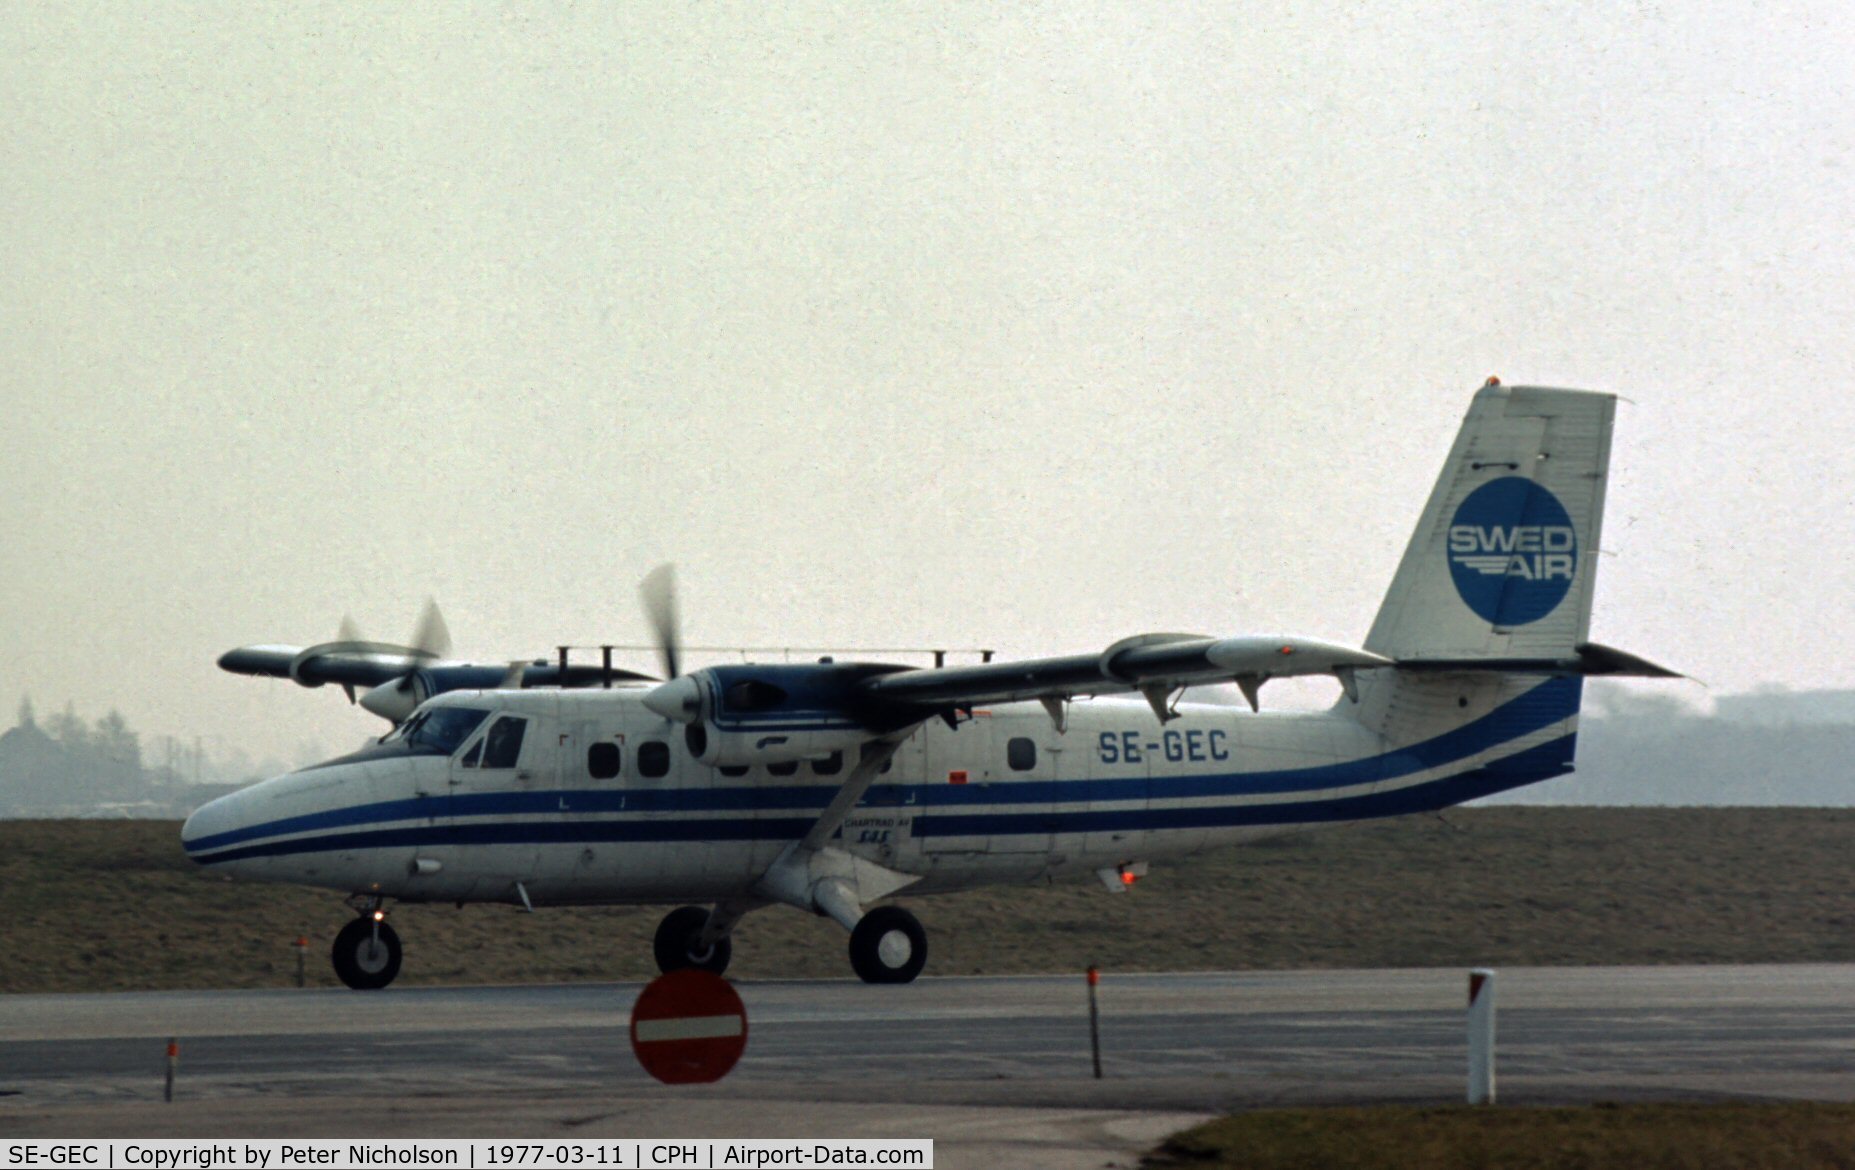 SE-GEC, 1973 De Havilland Canada DHC-6-300 Twin Otter C/N 375, This Twin Otter was chartered by SAS from Swedair when seen at Kastrup in the Spring of 1977.